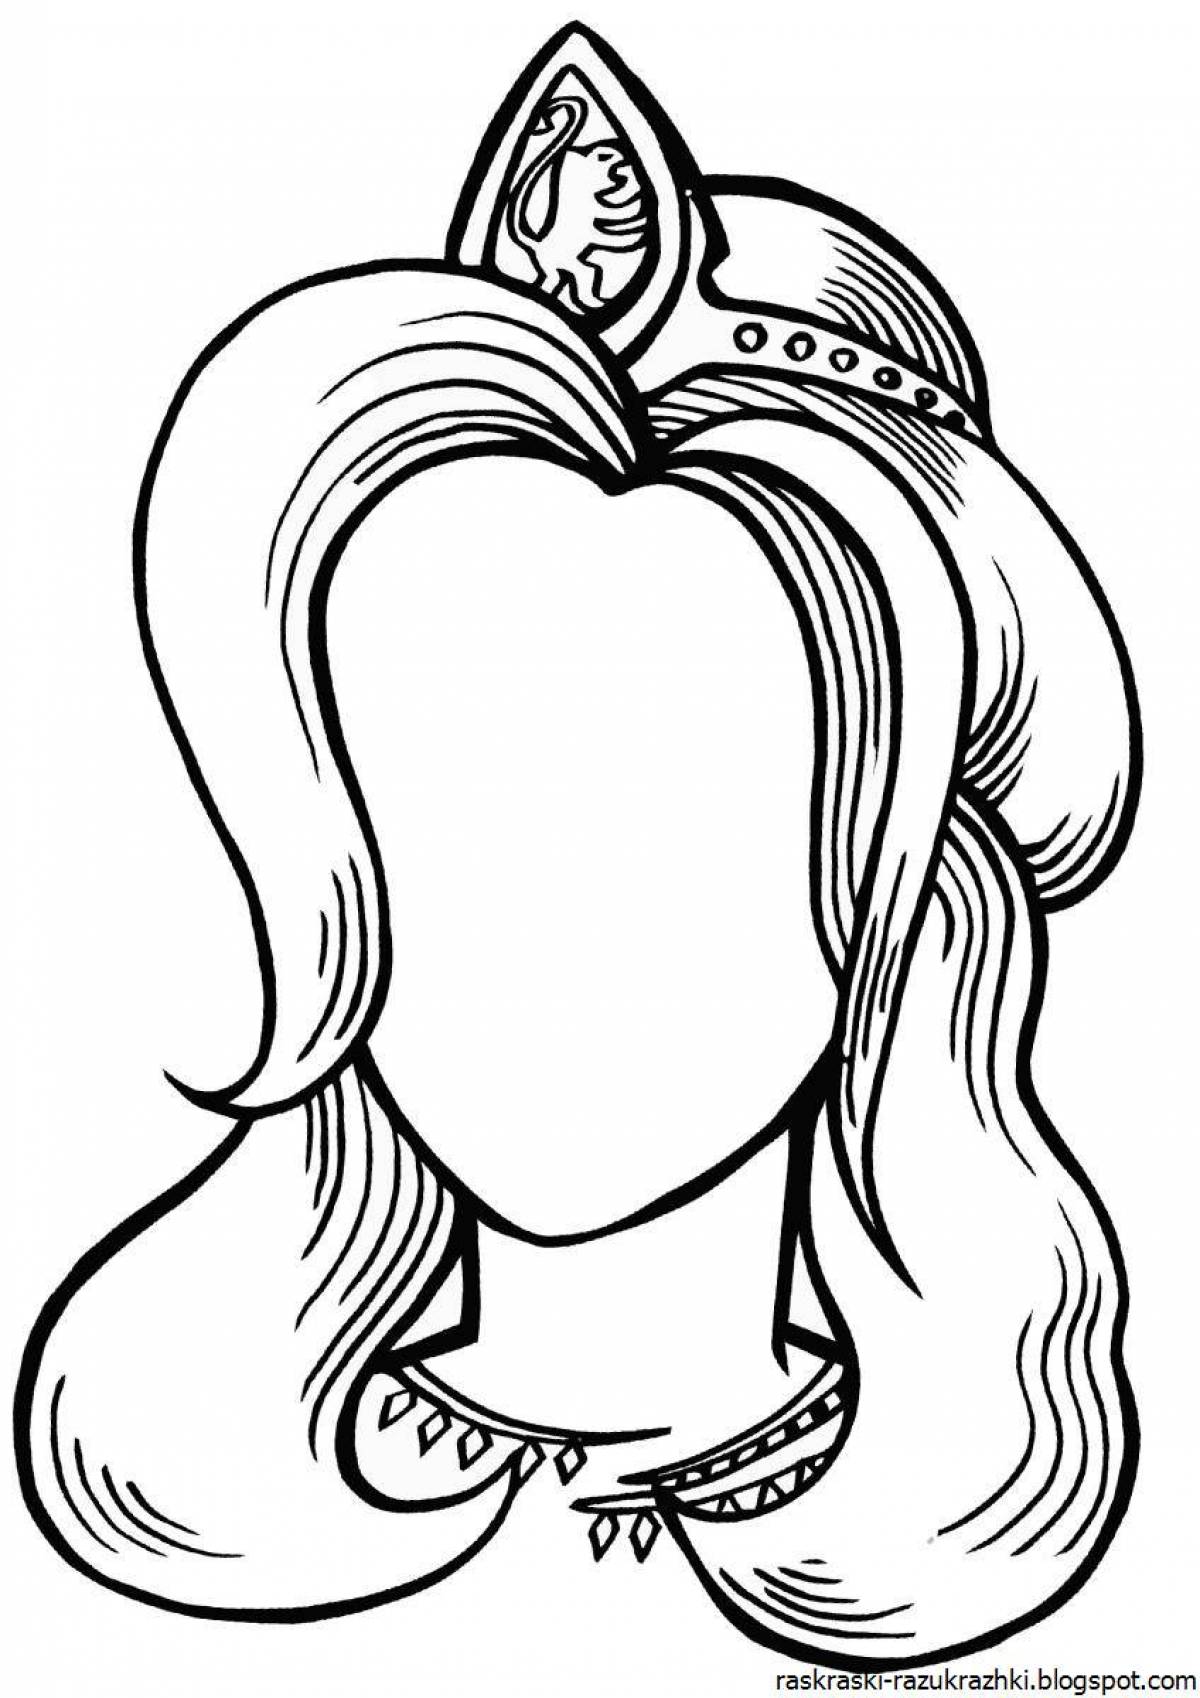 Spiral hair coloring page